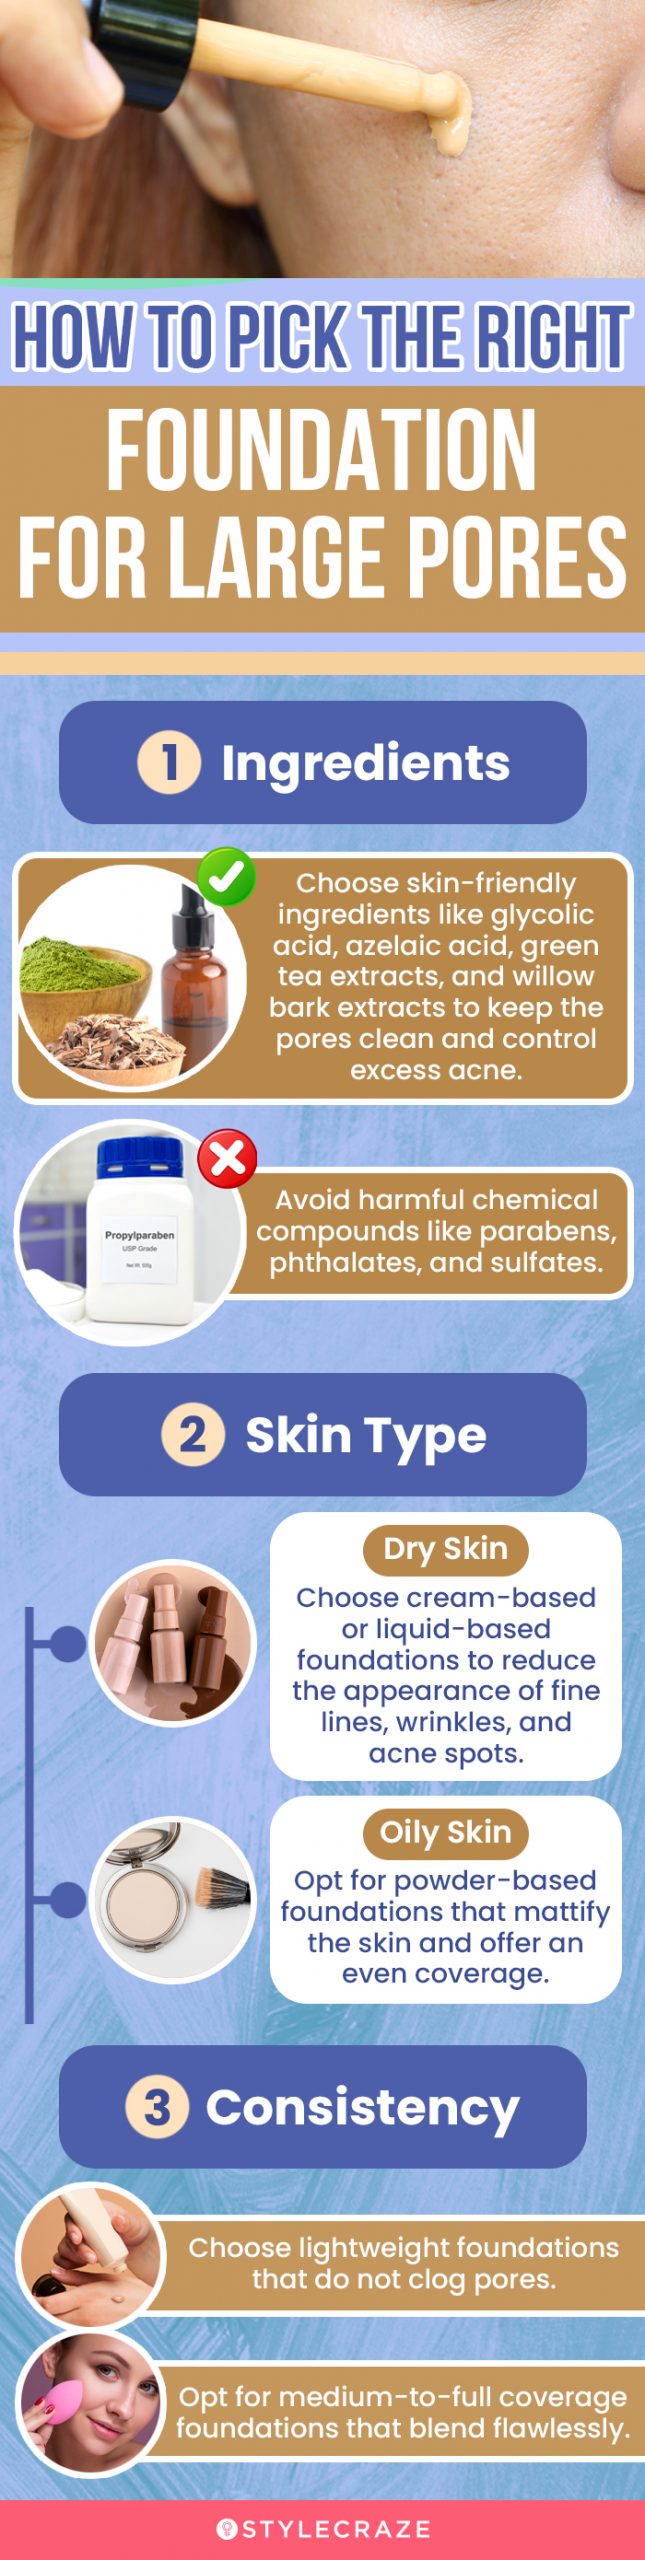 How To Pick The Right Foundation For Large Pores (infographic)